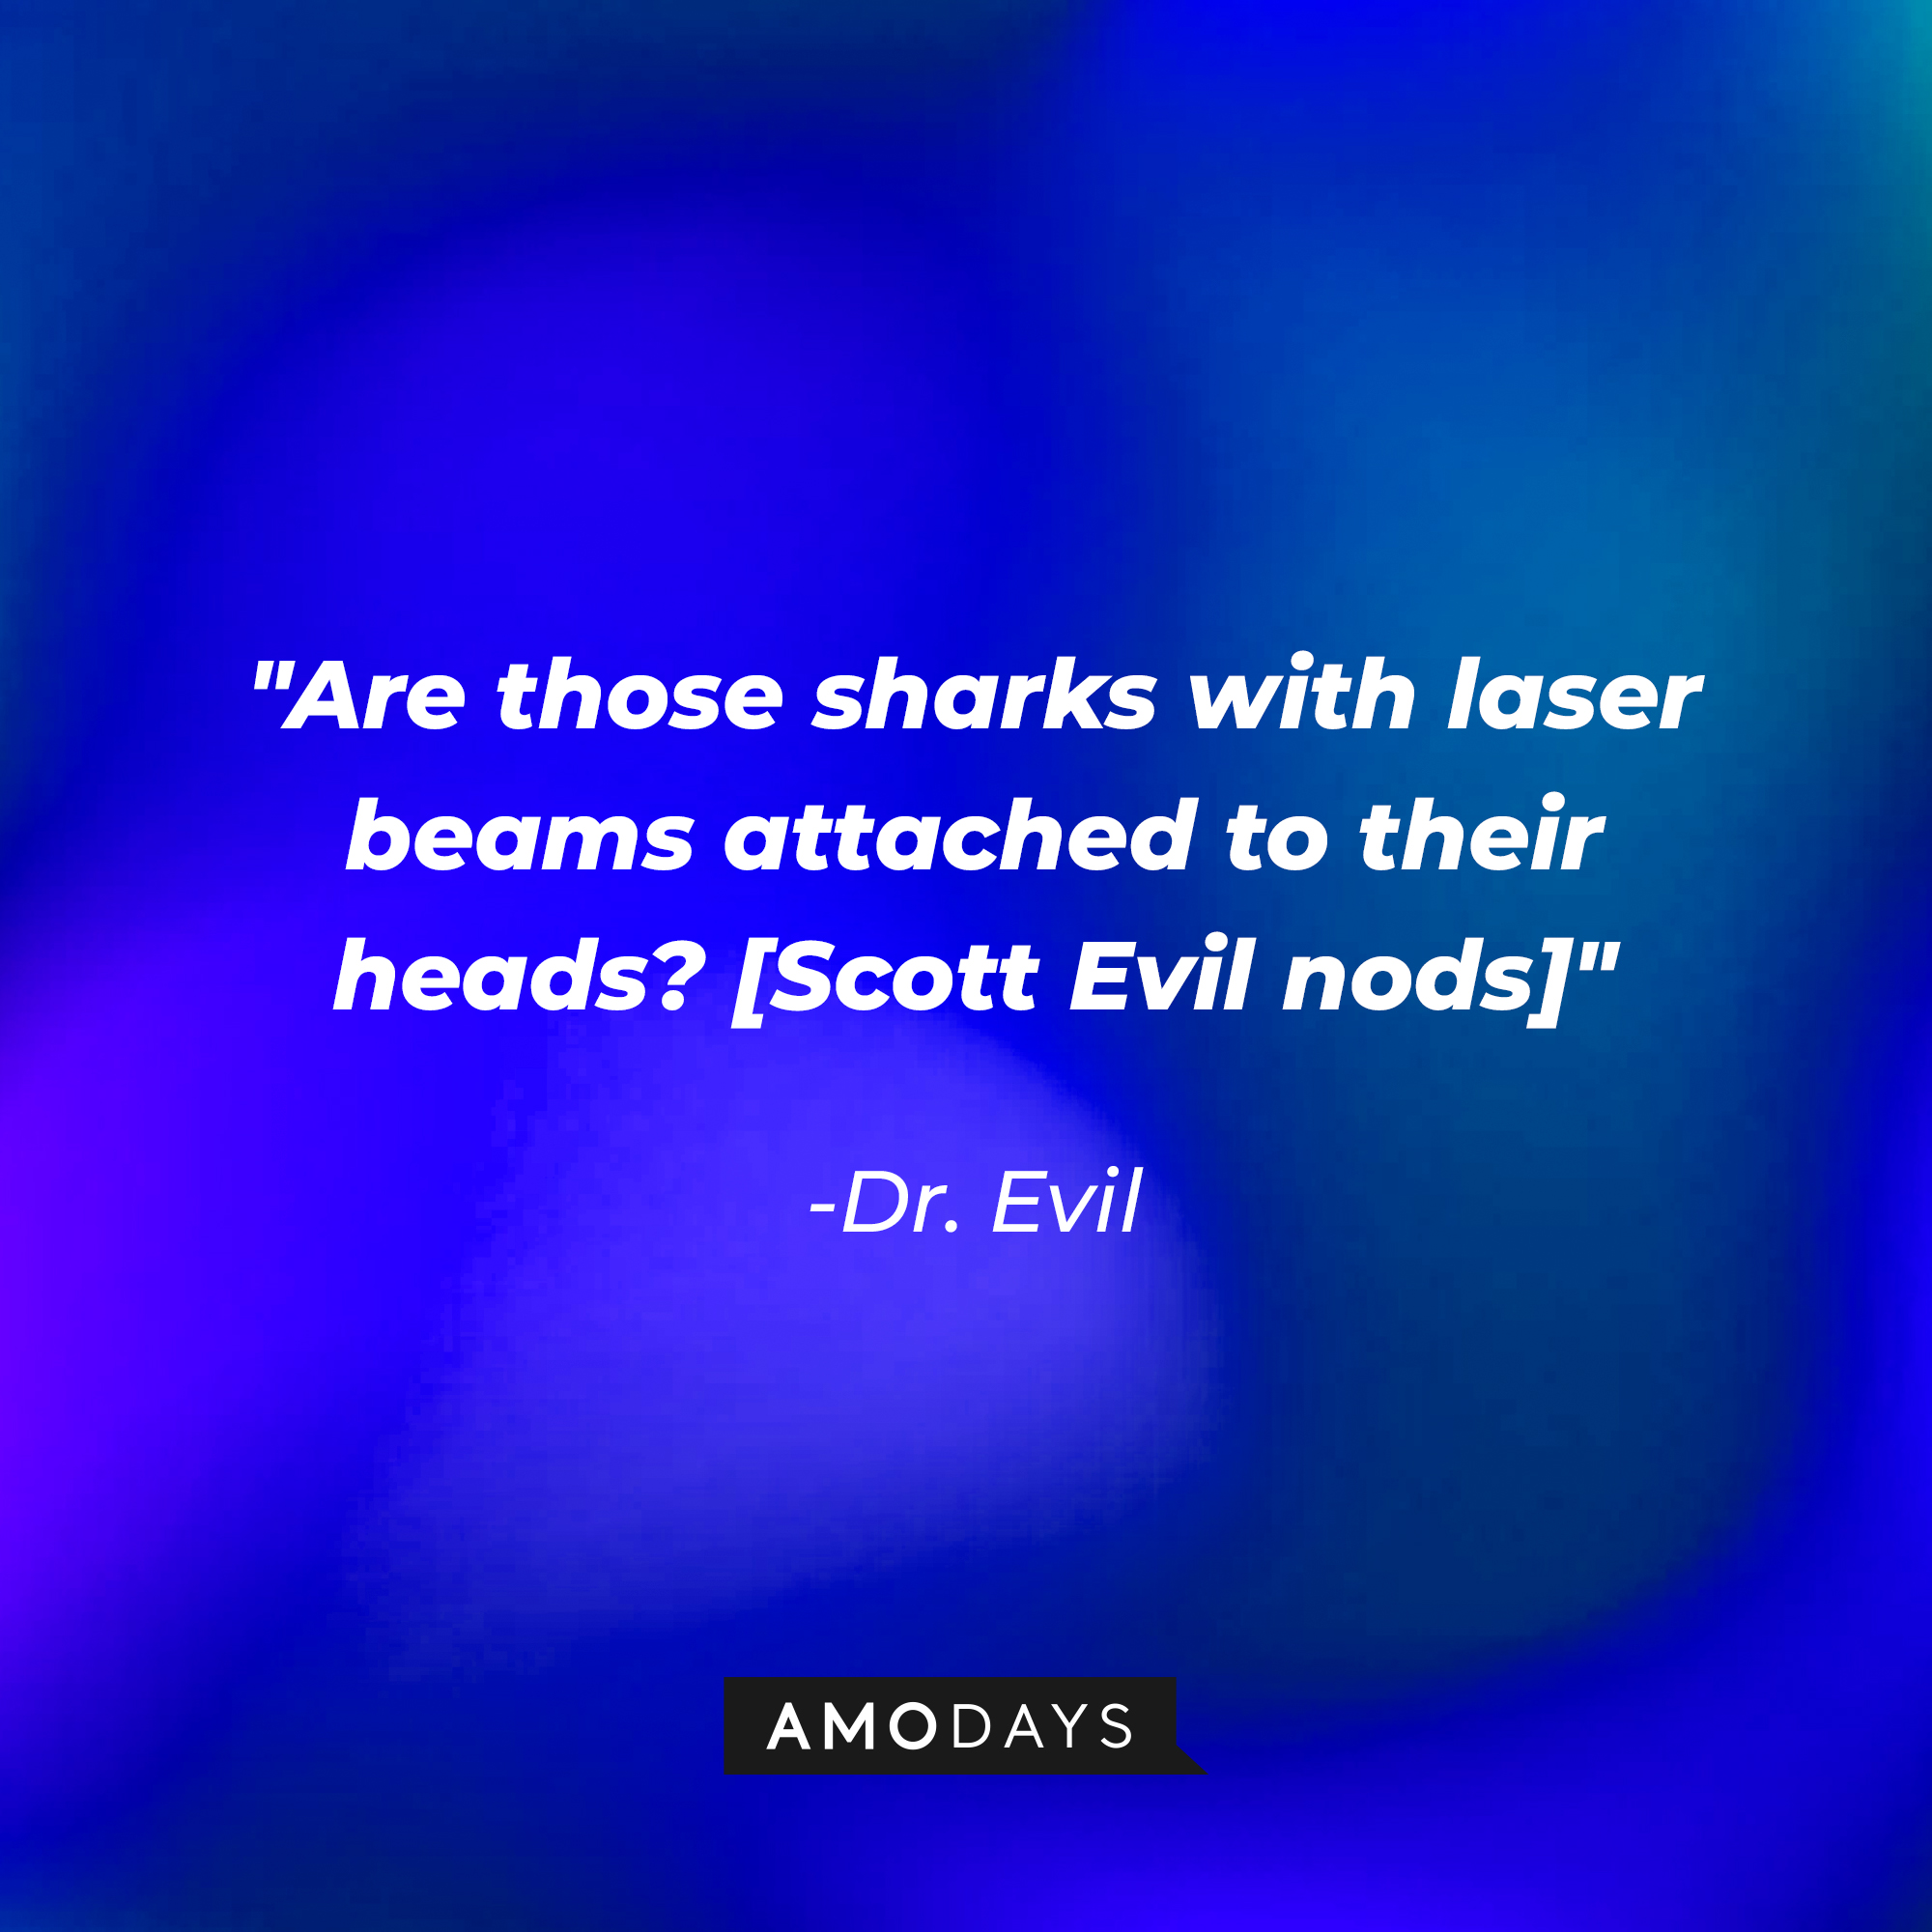 Dr. Evil's quote: “Are those sharks with laser beams attached to their heads? [Scott Evil nods]” | Source: Amodays